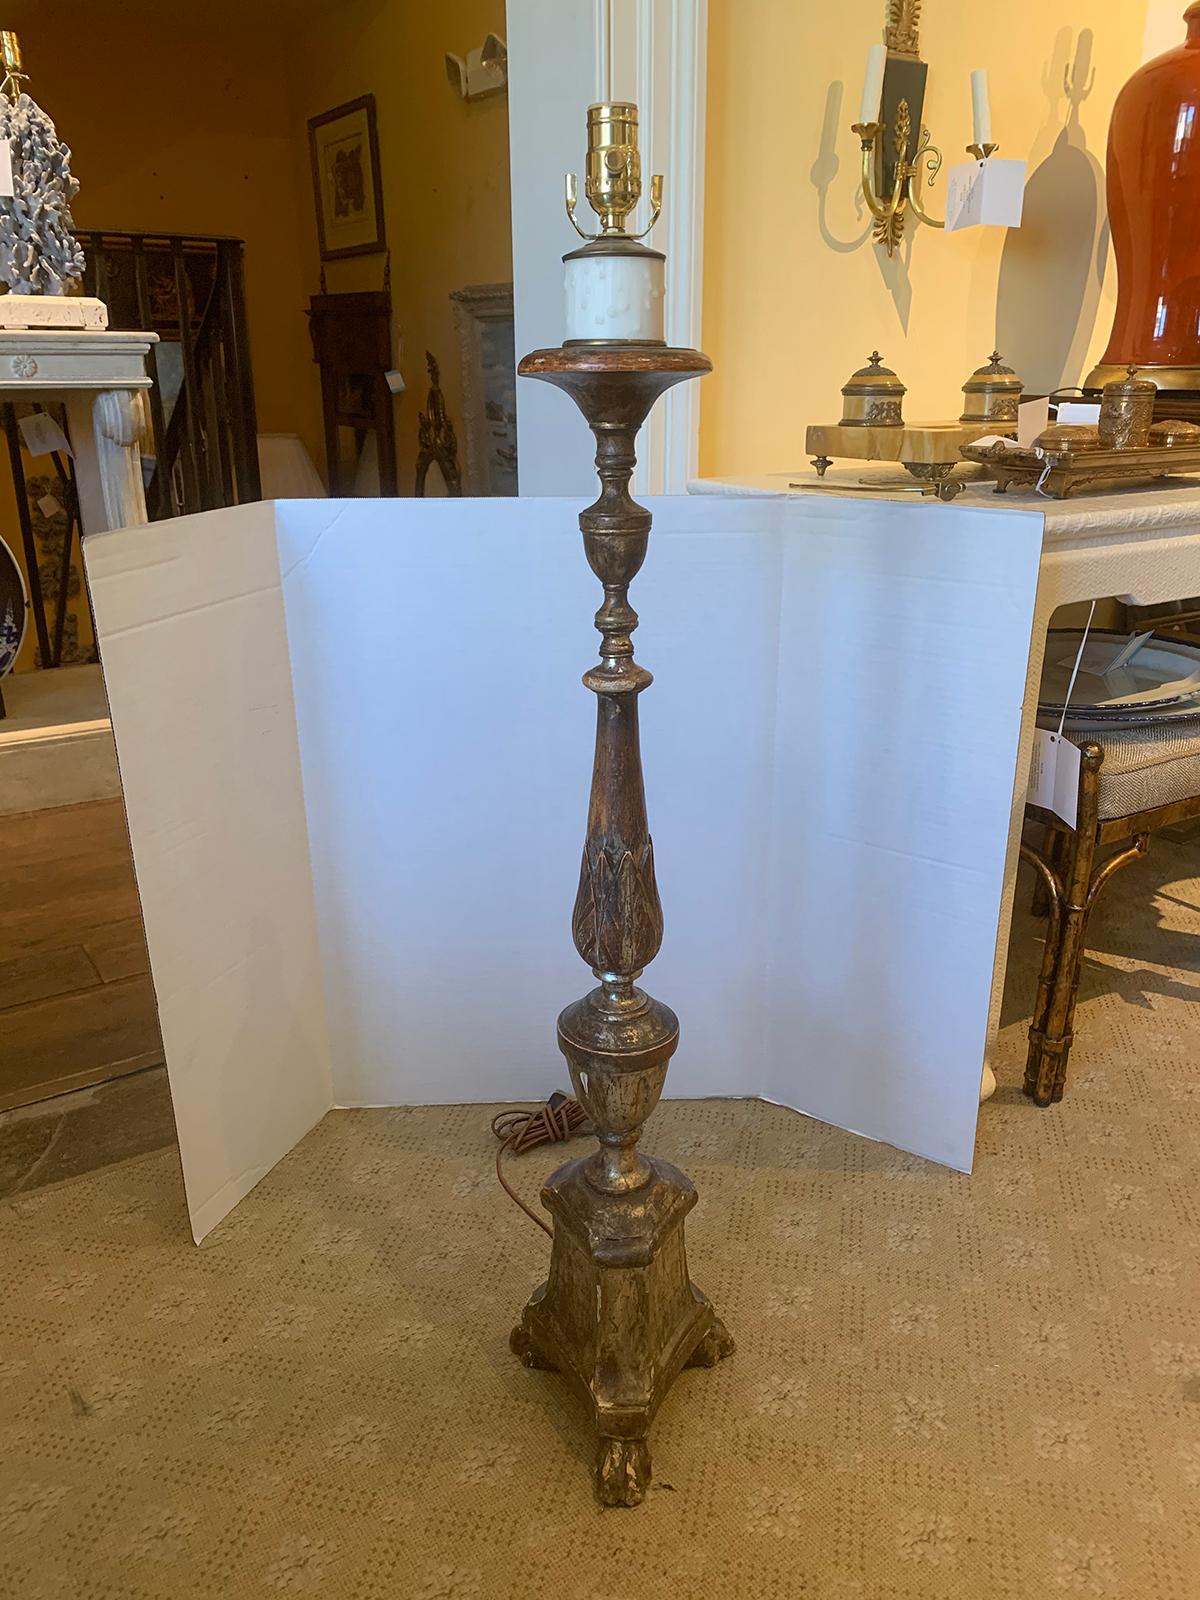 19th century Italian polychrome pricket candlestick as floor lamp
New wiring.